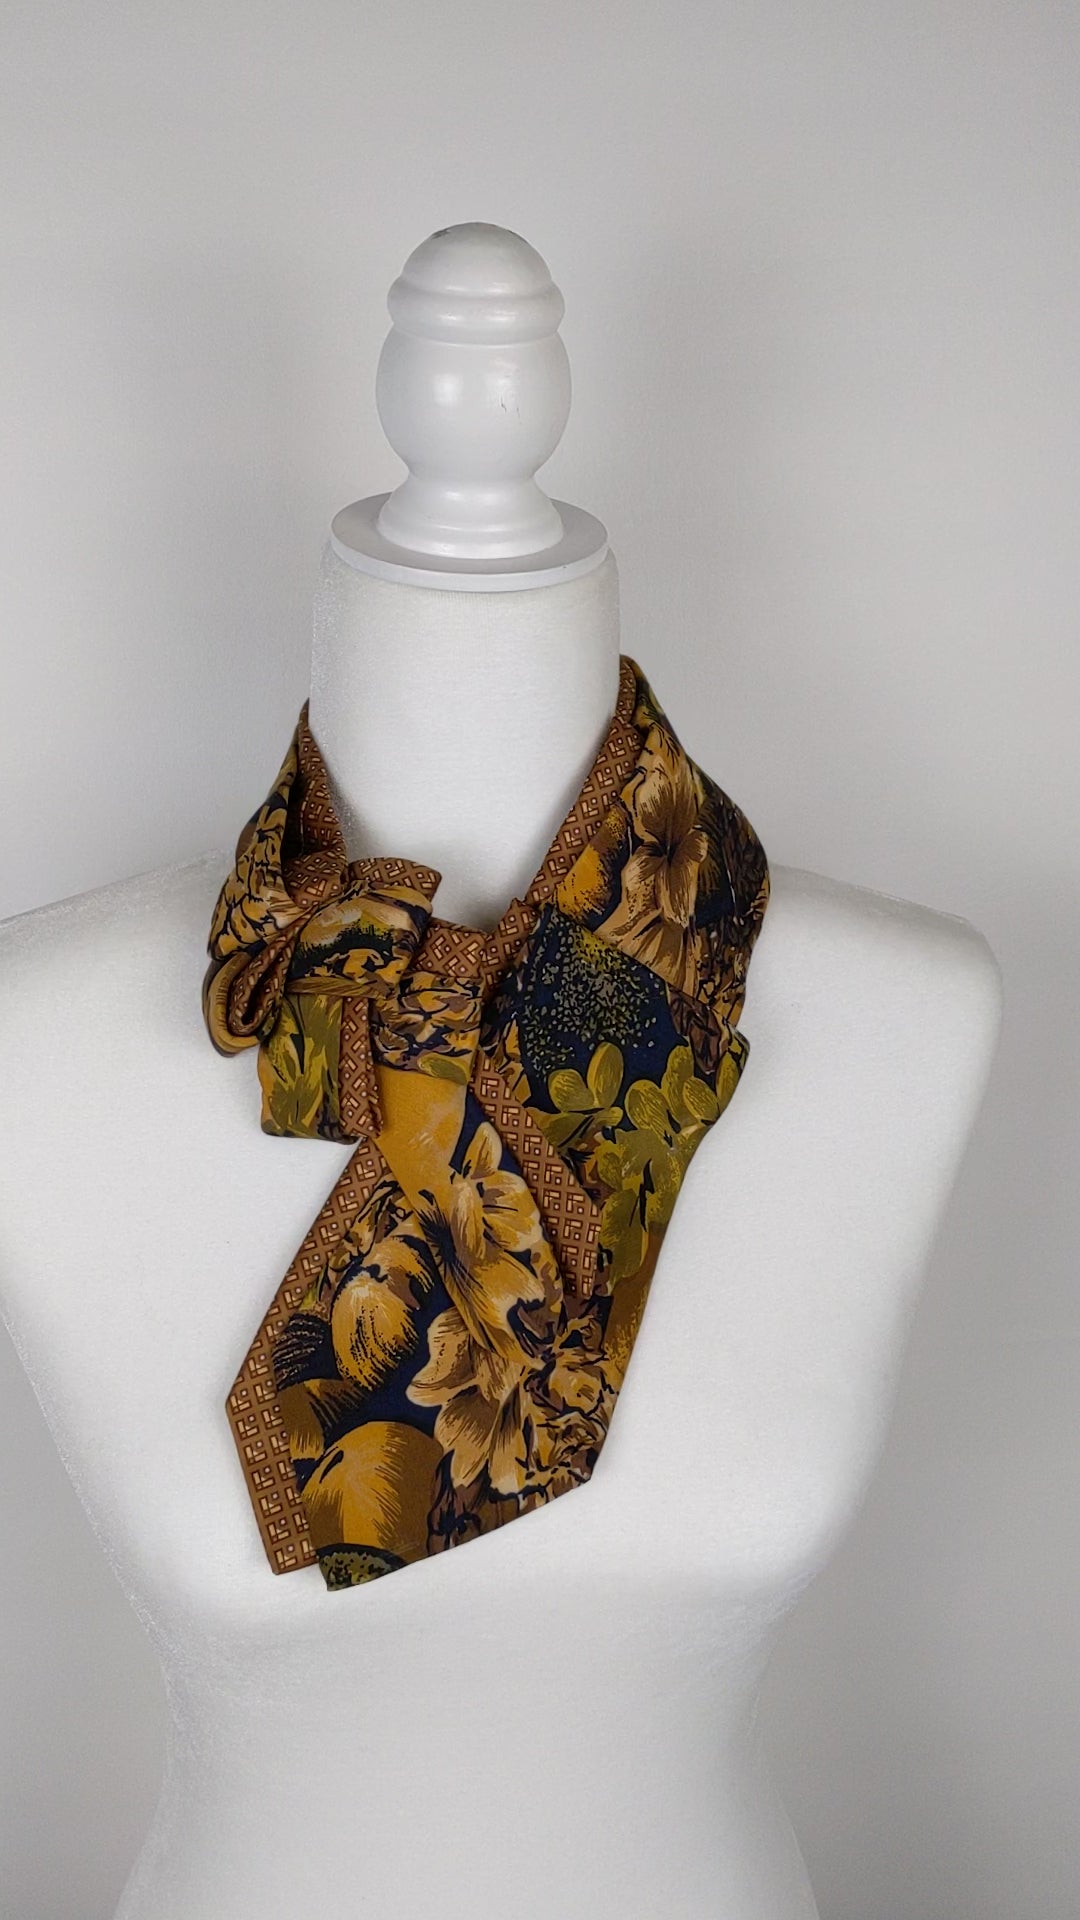 Double Ascot In A Mustard Floral Print.